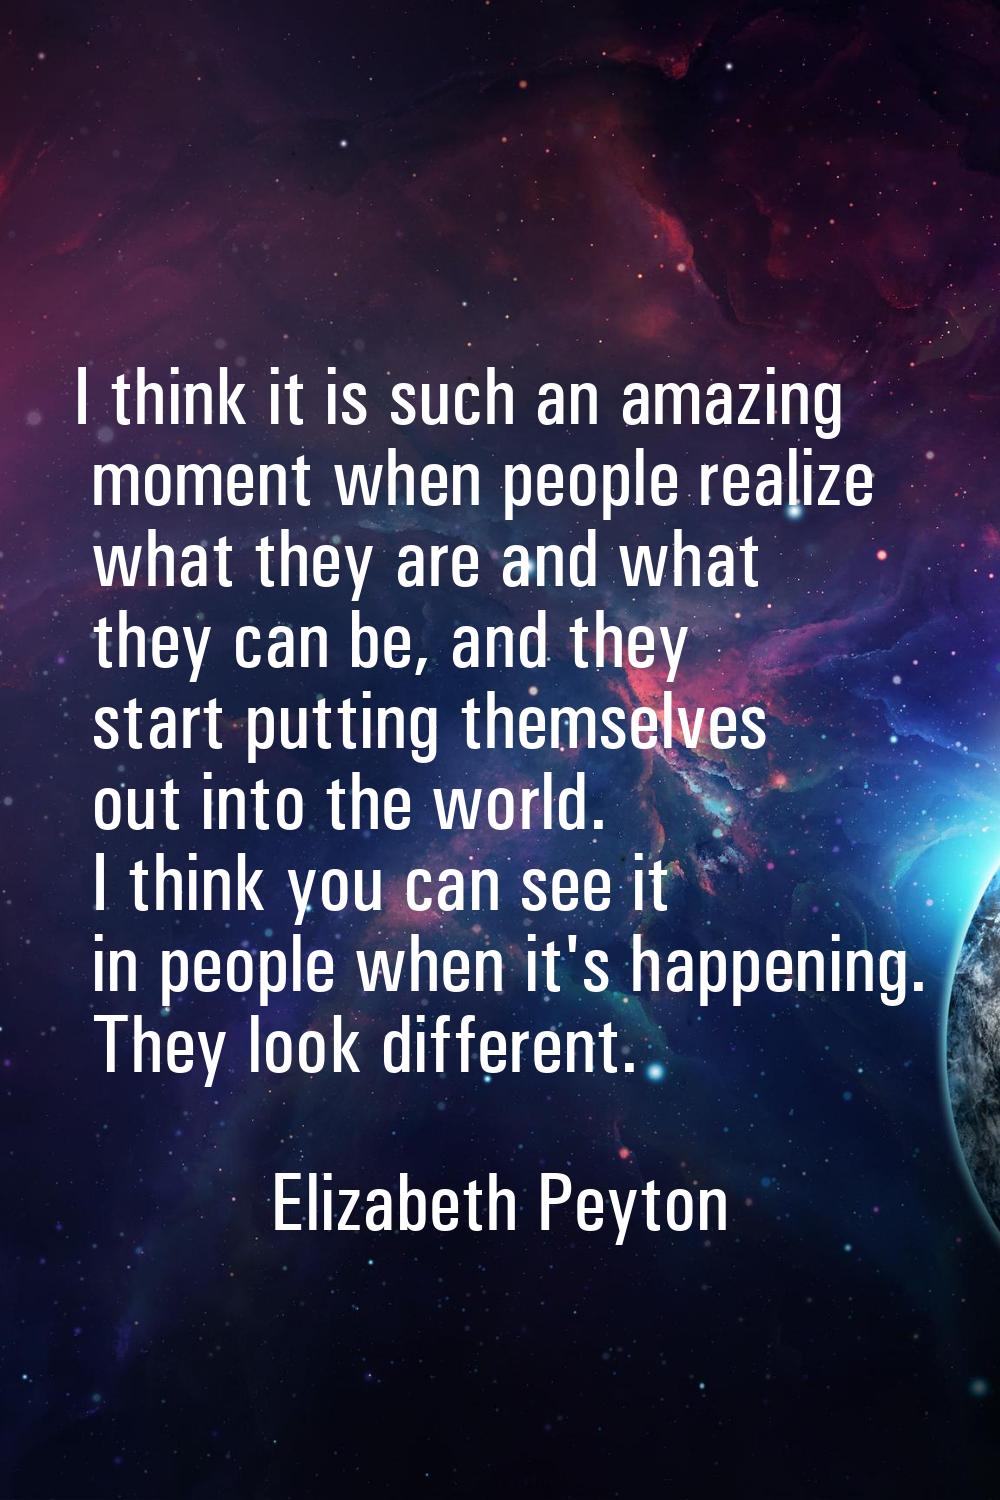 I think it is such an amazing moment when people realize what they are and what they can be, and th